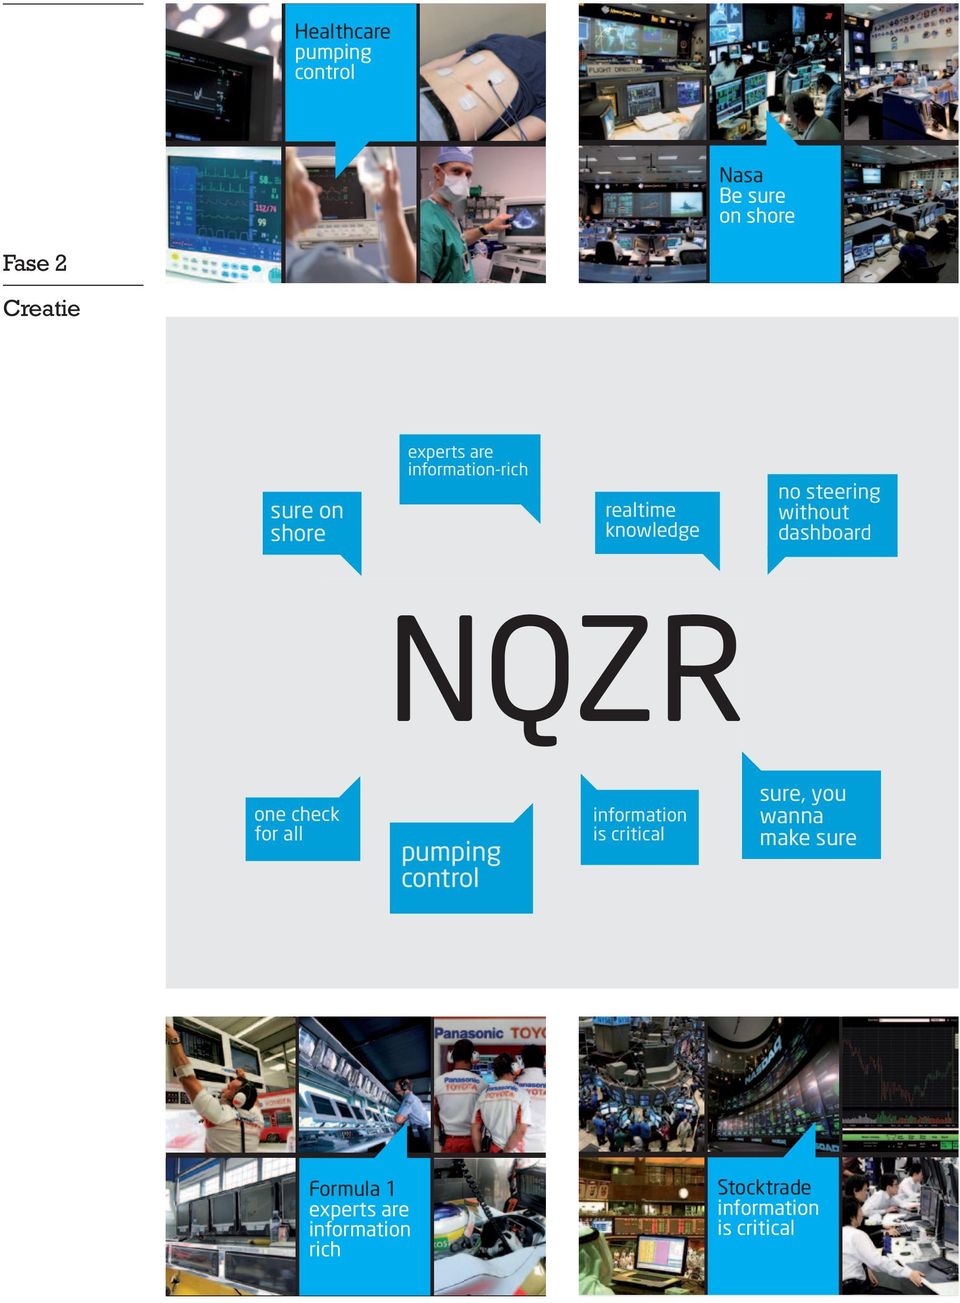 steering without dashboard offsure NQZR one check for all pumping control is critical sure, you